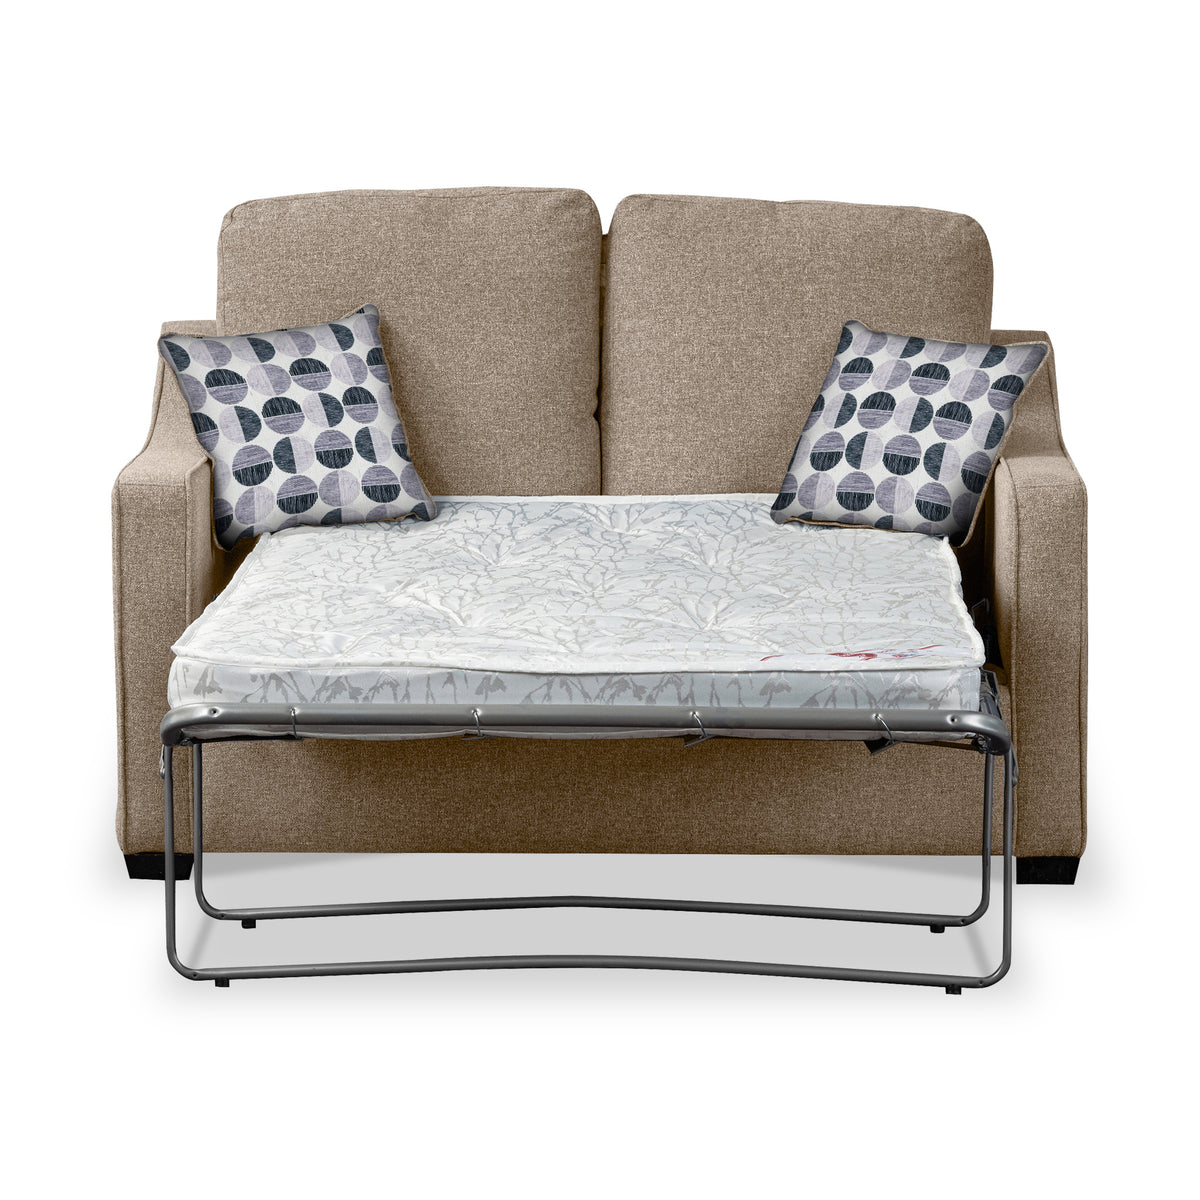 Fenton Fawn Soft Weave 2 Seater Sofabed with Mono Scatter Cushions from Roseland Furniture